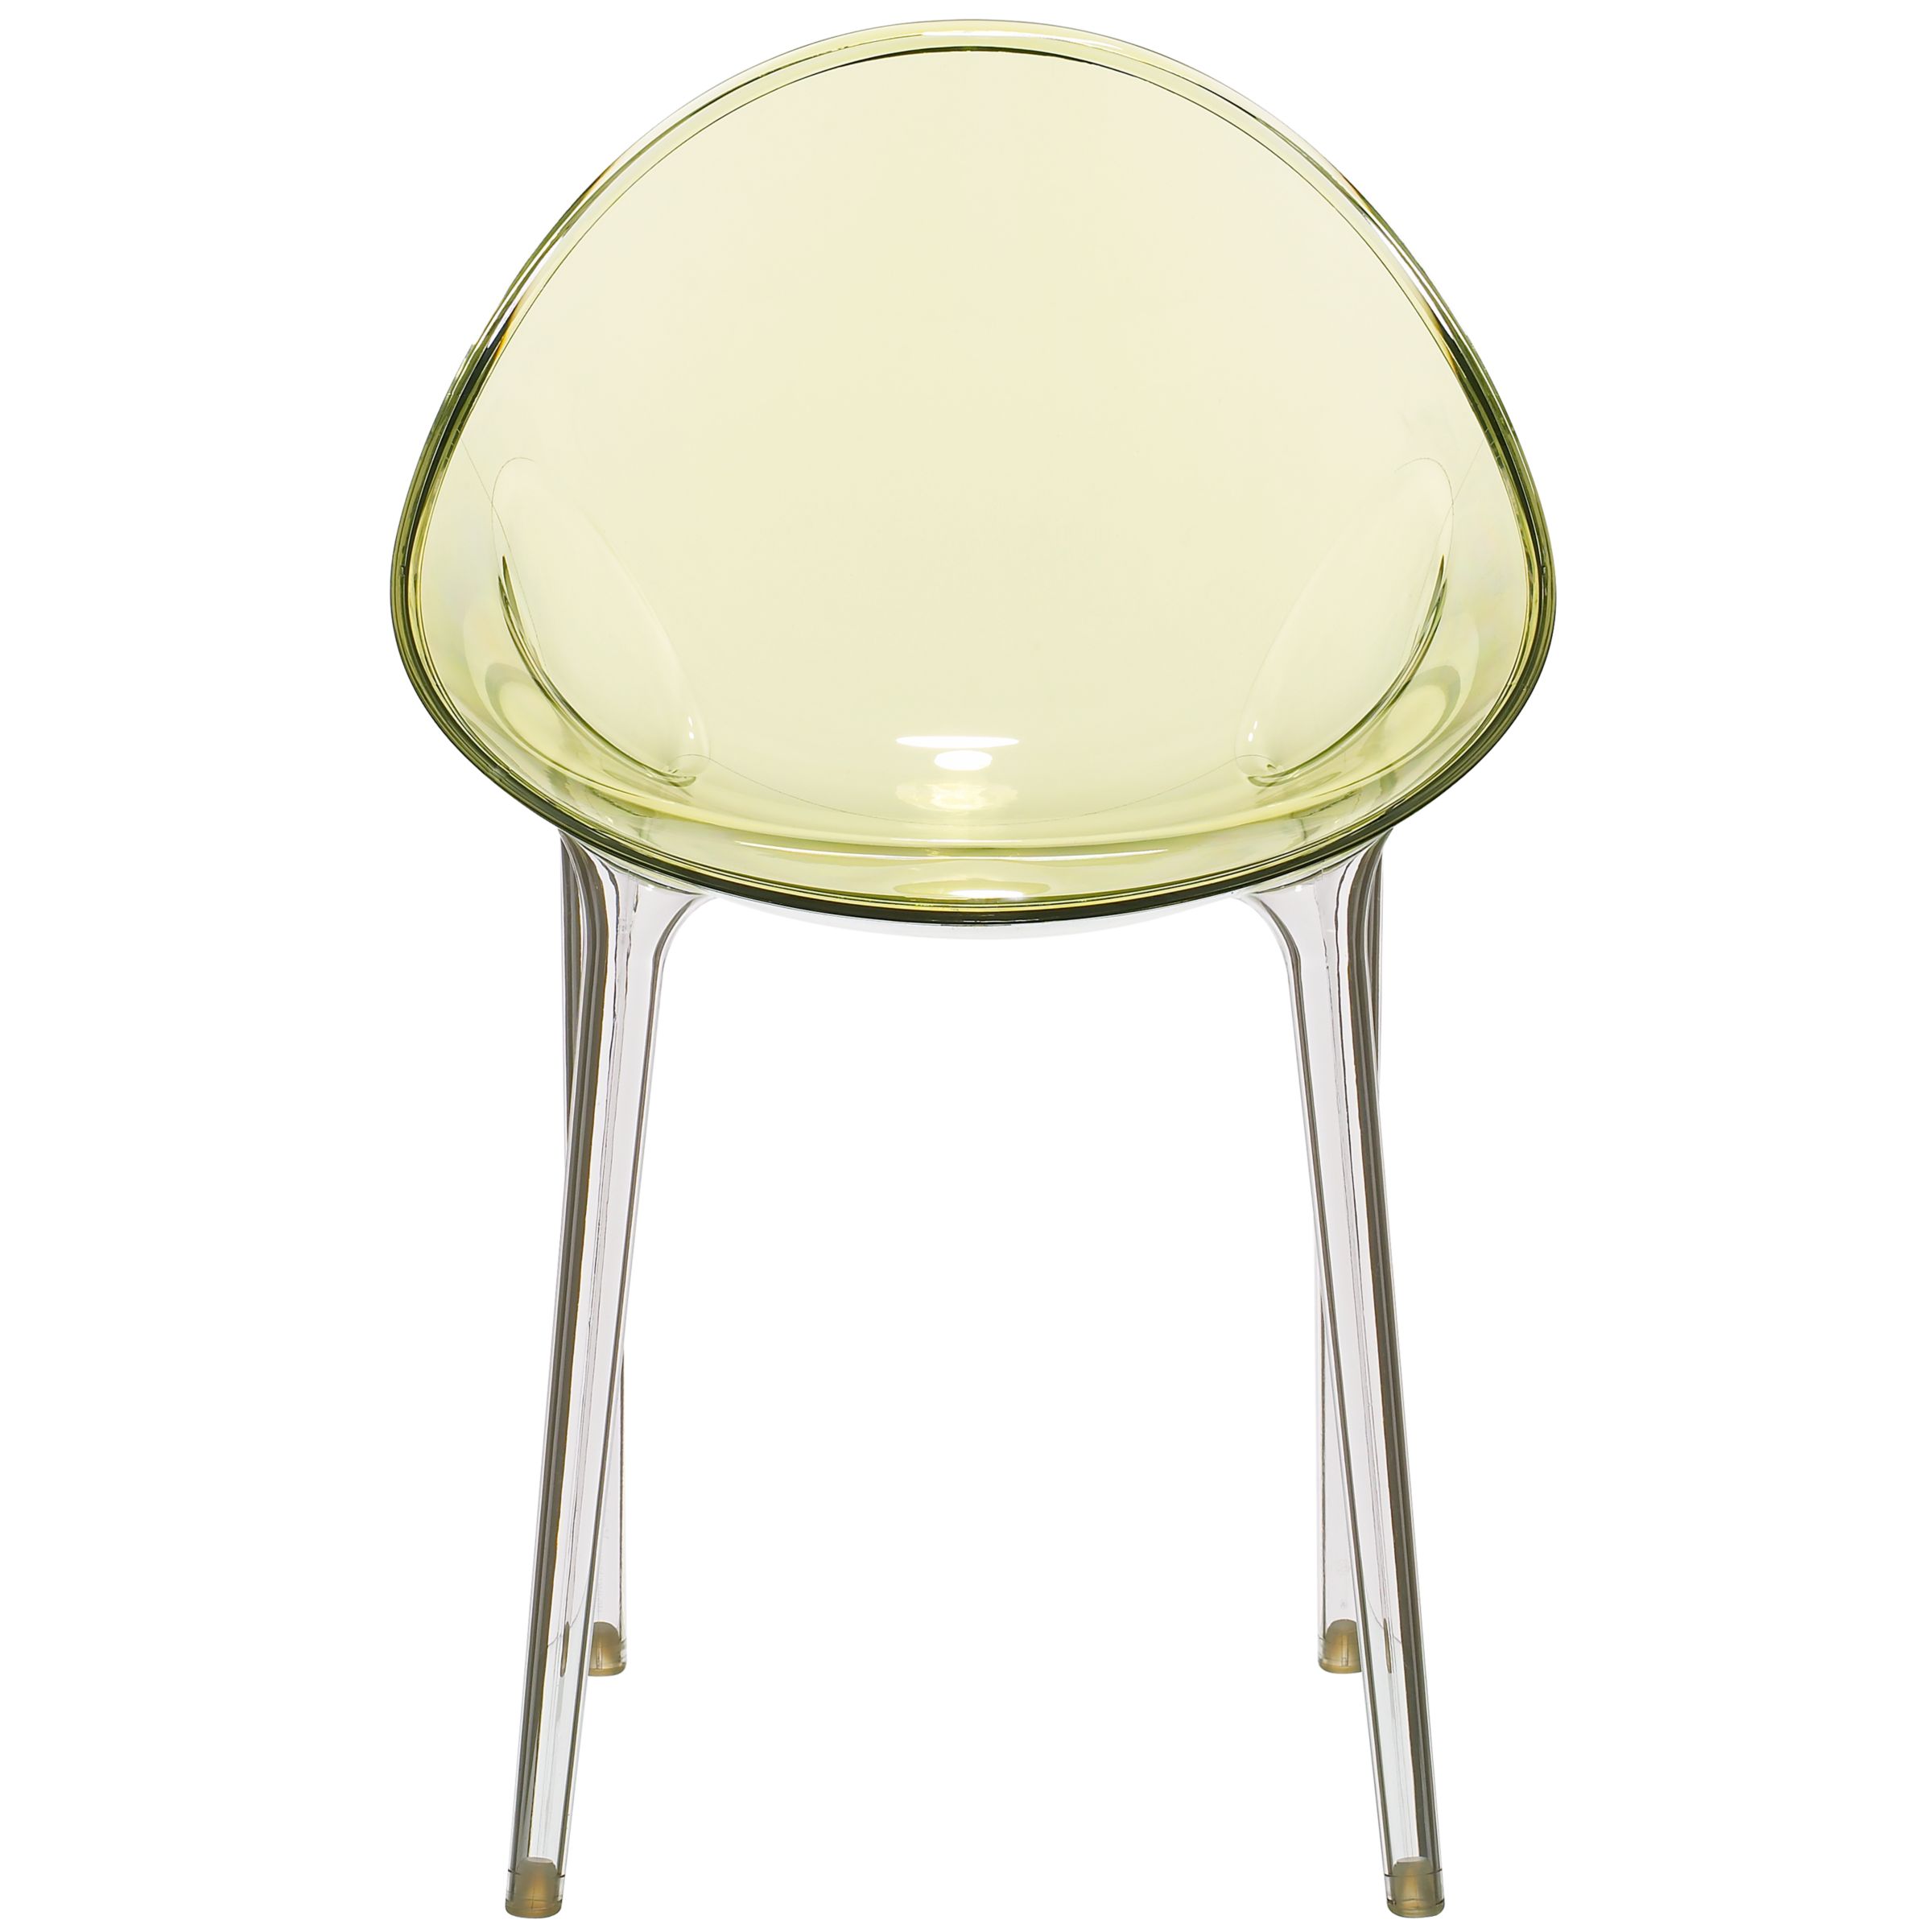 Philippe Starck for Kartell Mr. Impossible Chair, Green at John Lewis